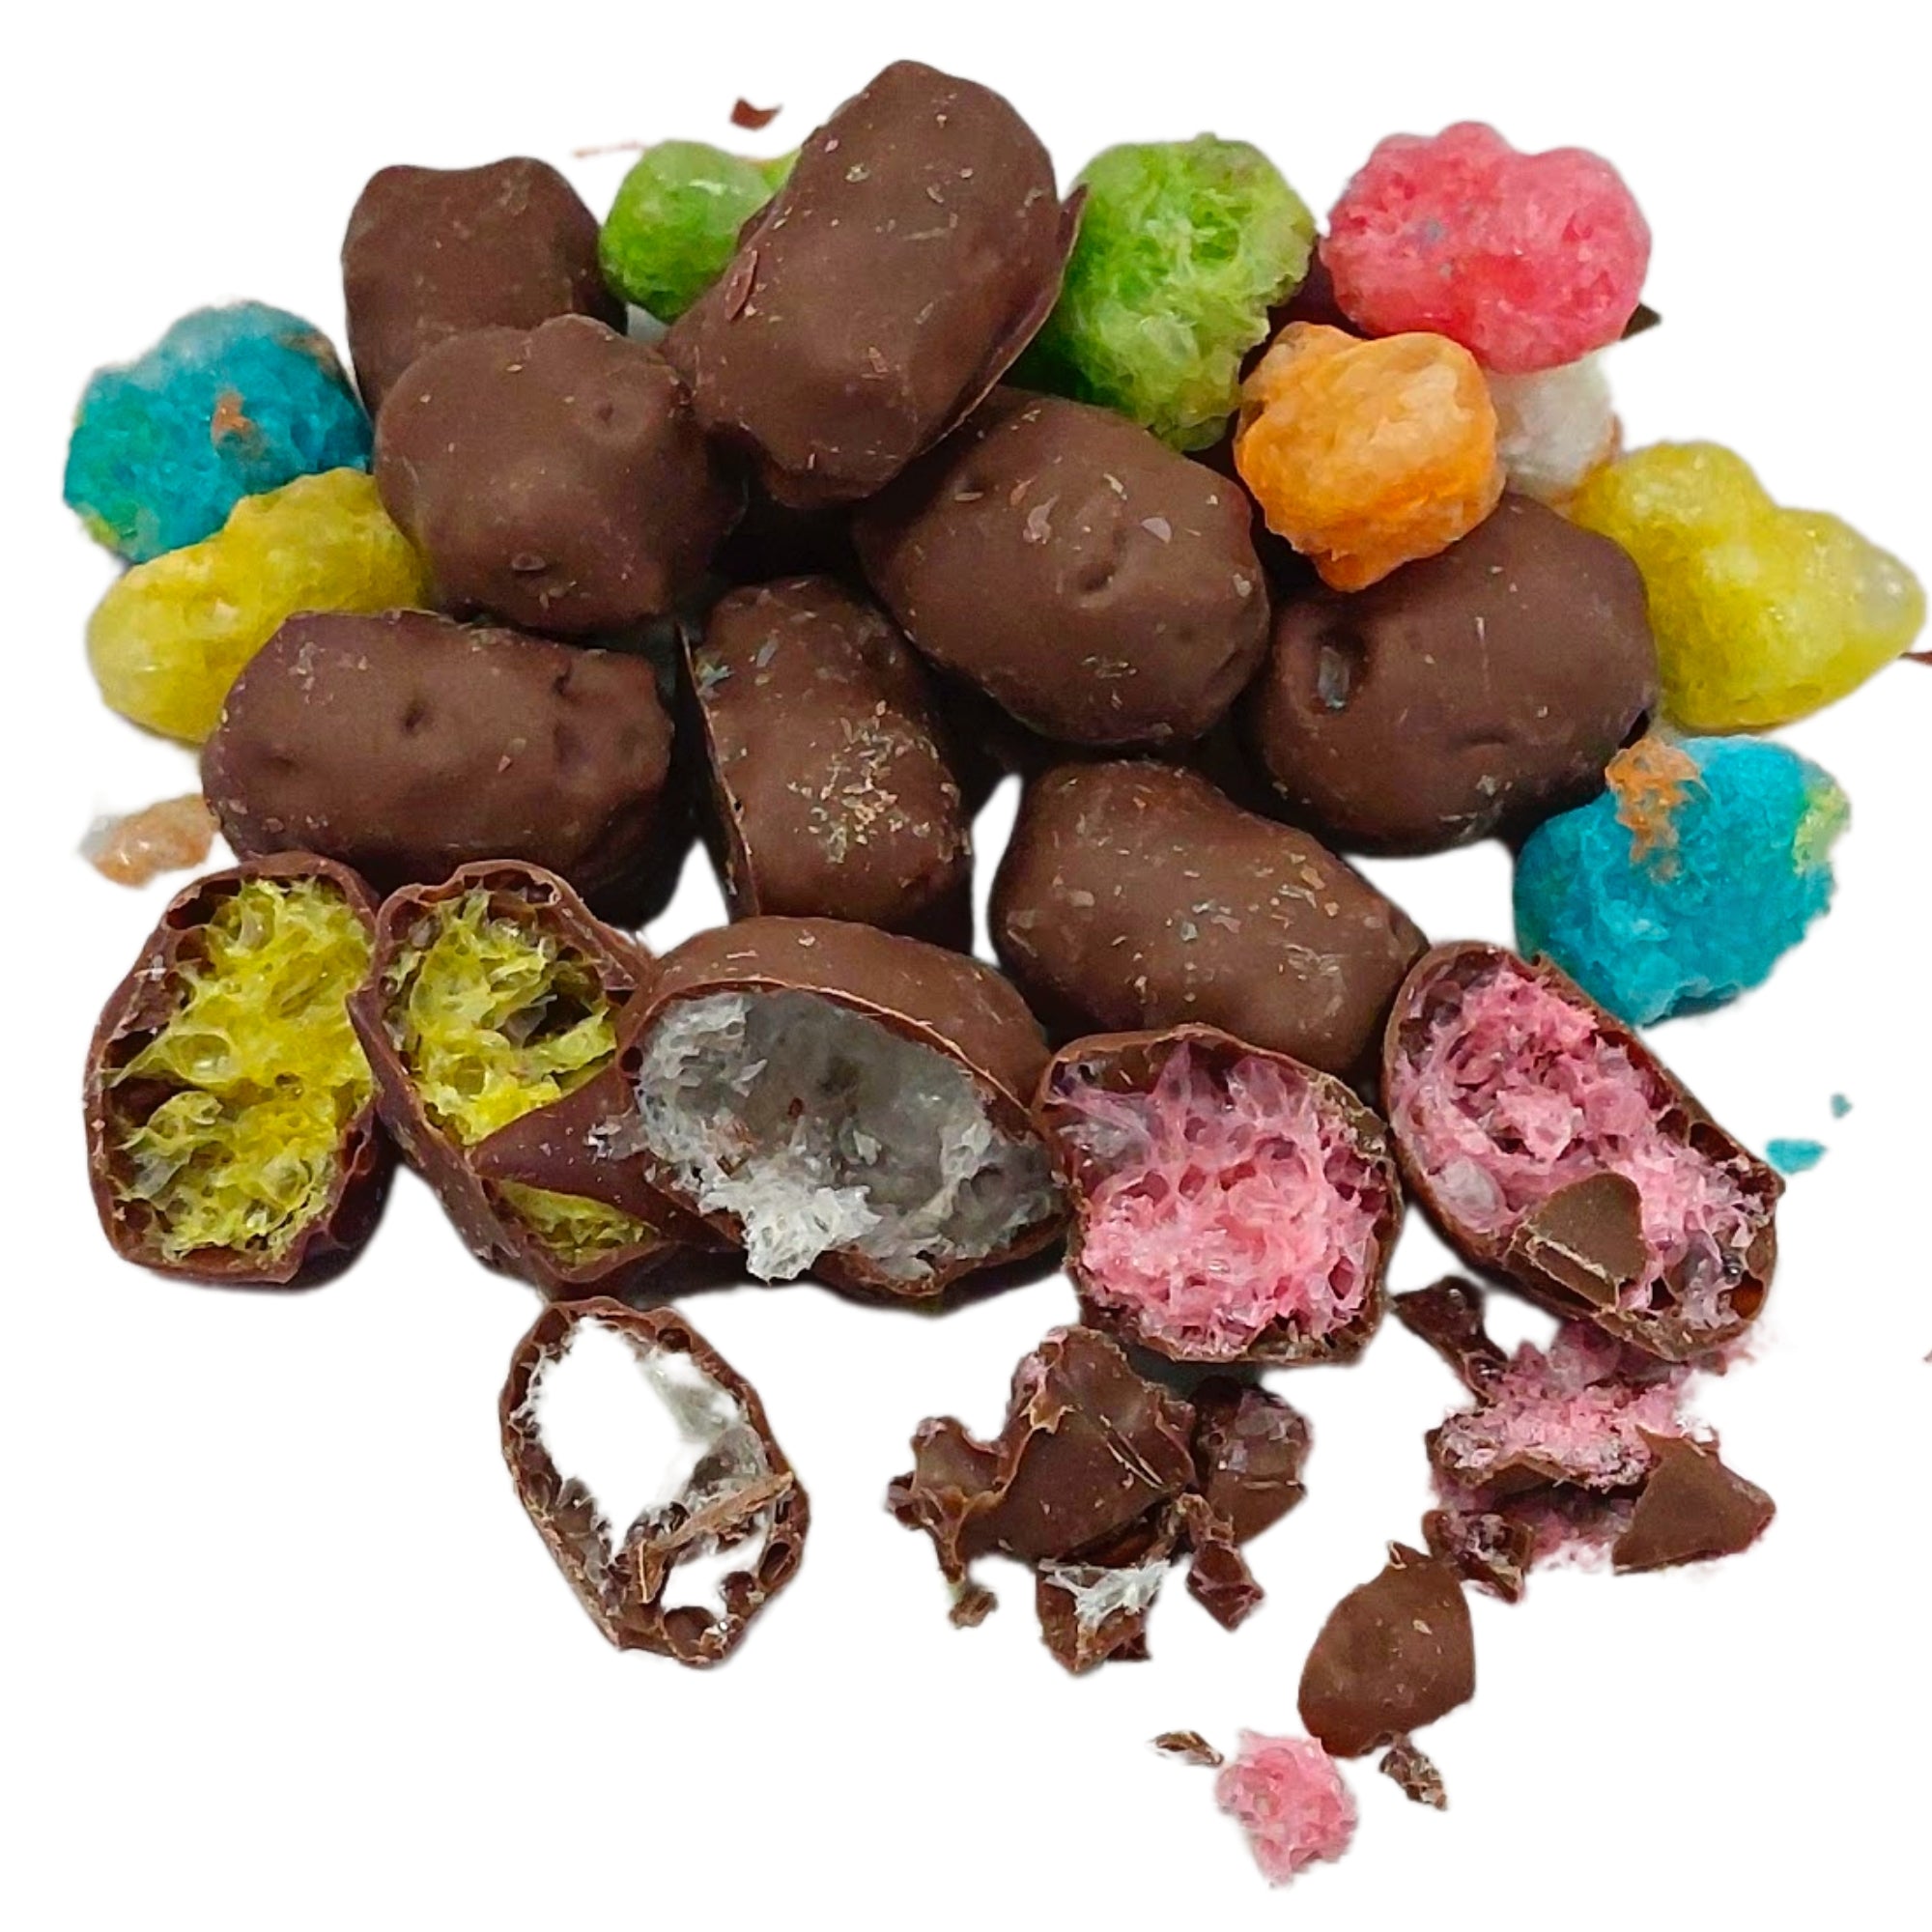 Frochies Gummi Bears chocolate coated freeze dried candy lollies